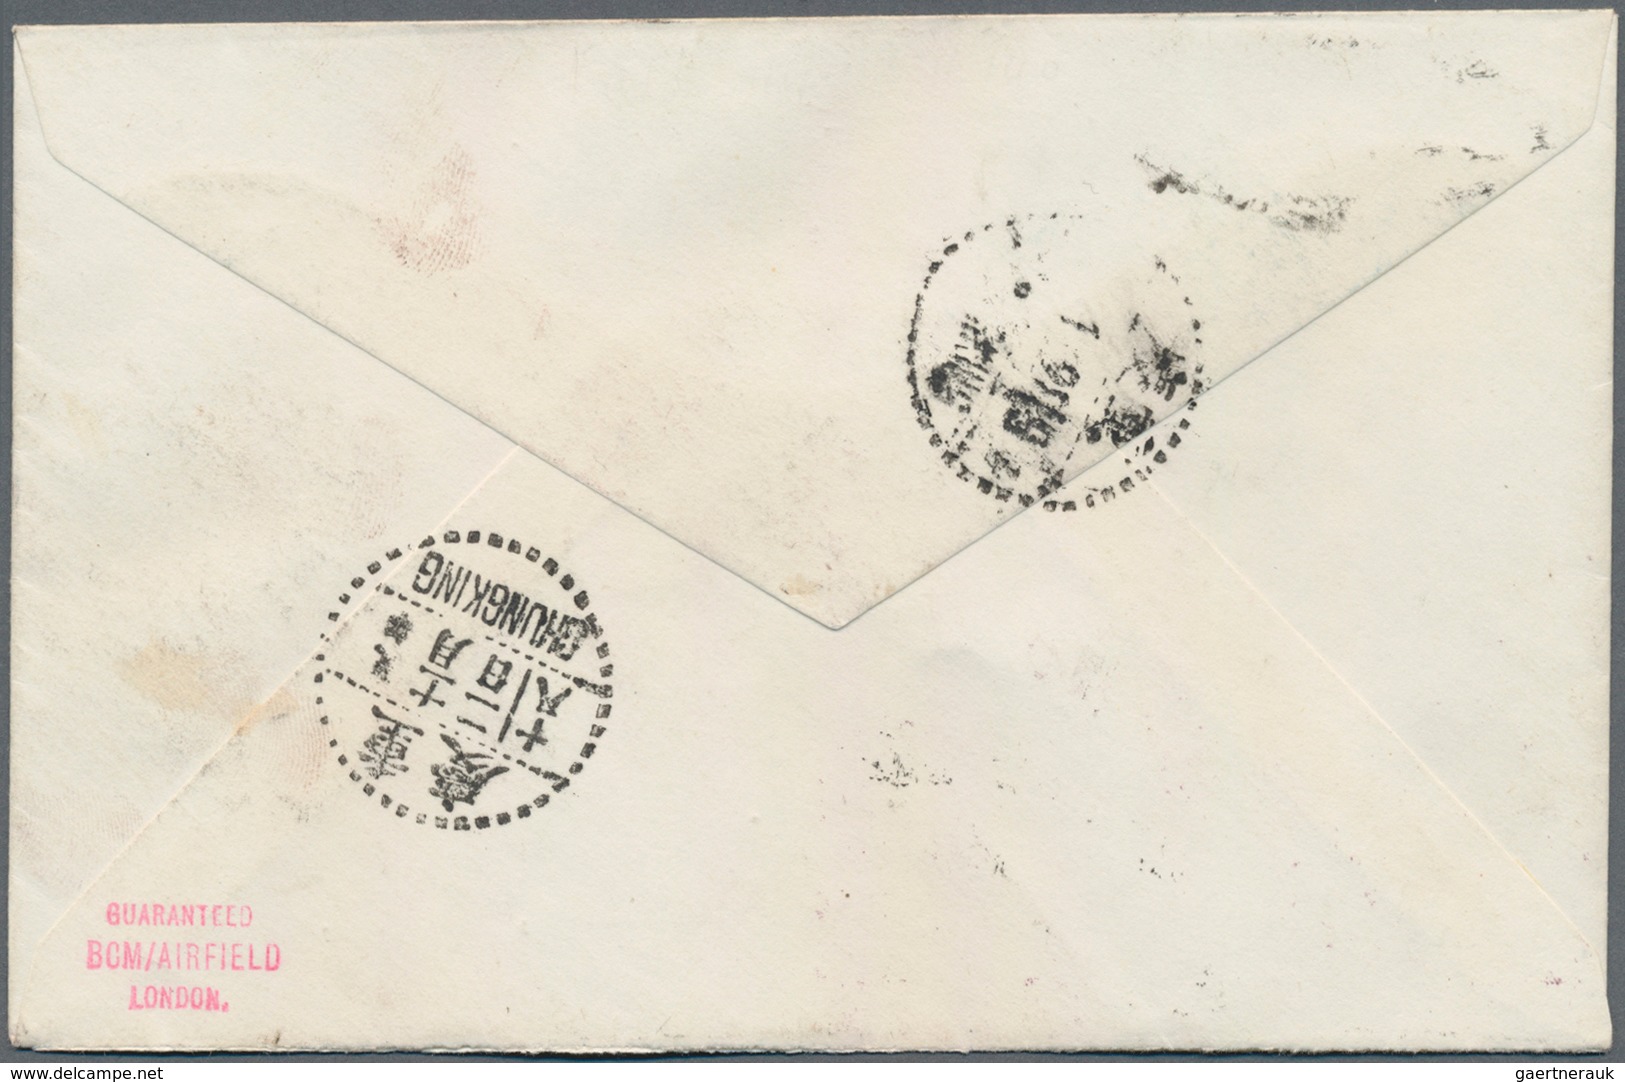 China - Flugpost: 1939, First Flight Air Mail Envelope Headed "First Flight Chinese National Aviatio - Other & Unclassified